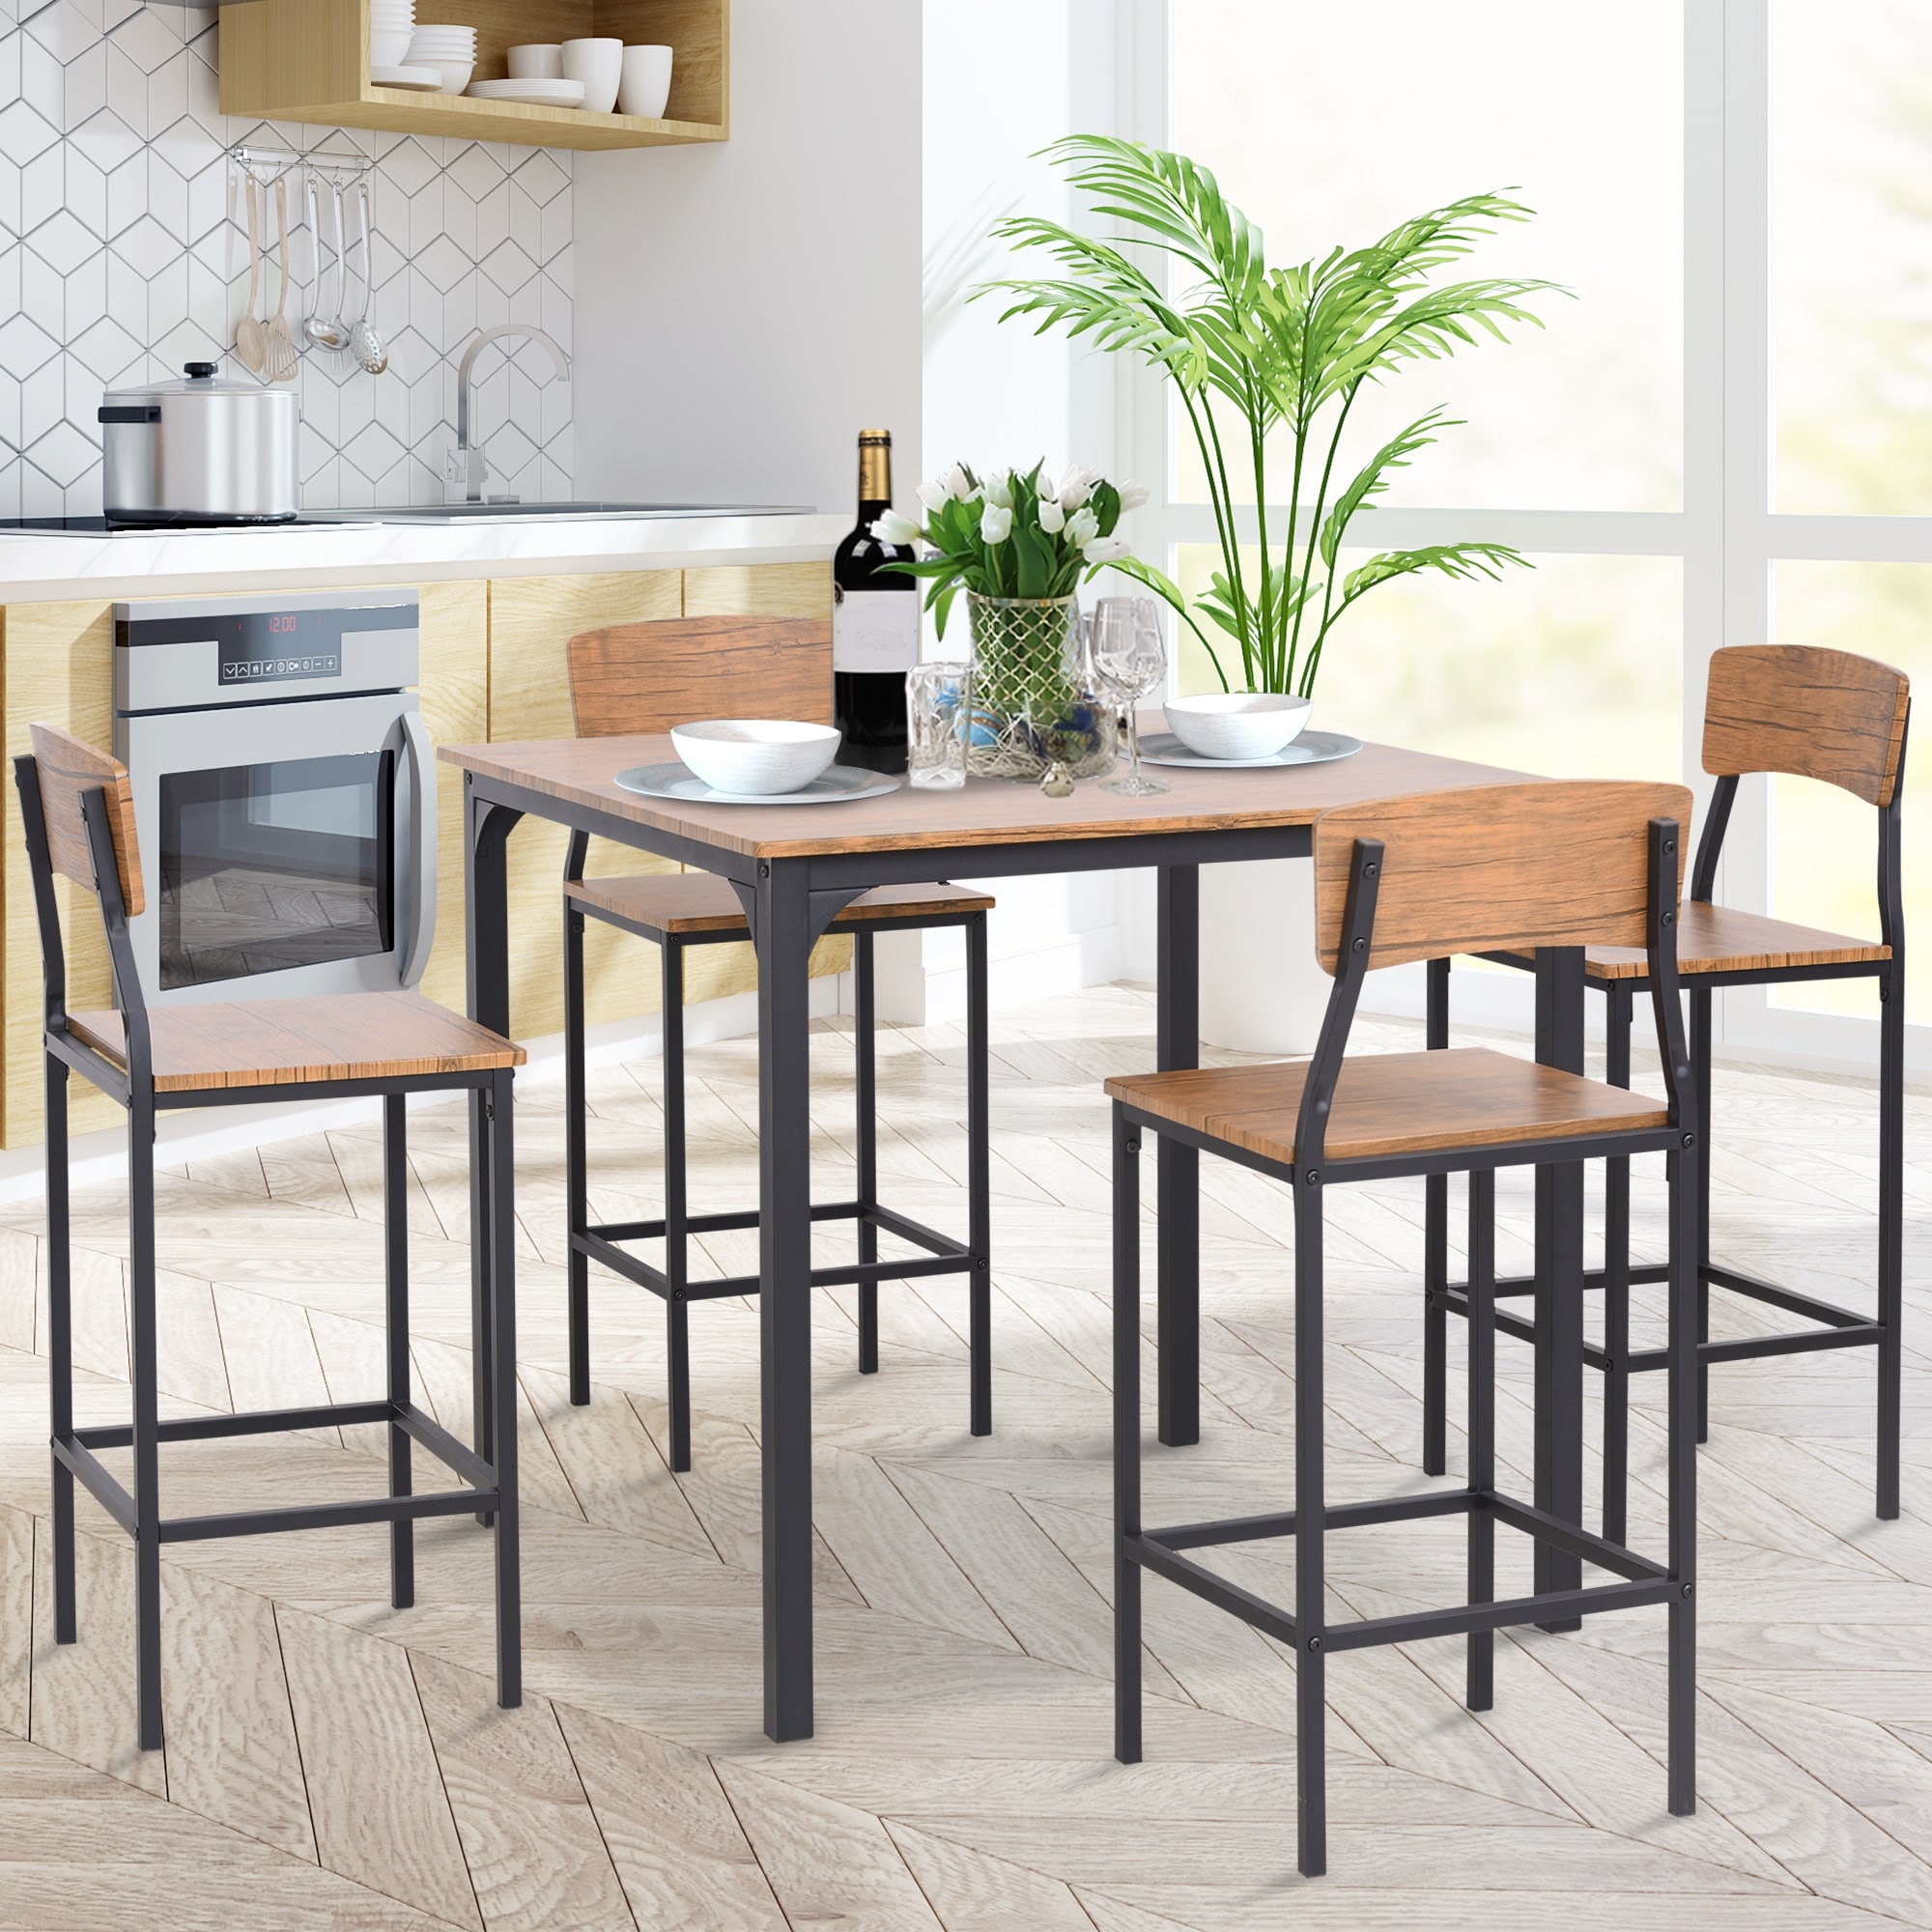 Homcom 5 Pc Modern Counter Height Dining Set Compact Kitchen Table 4 Chairs Set With Footrest Metal Legs Wood On Sale Overstock 32814393